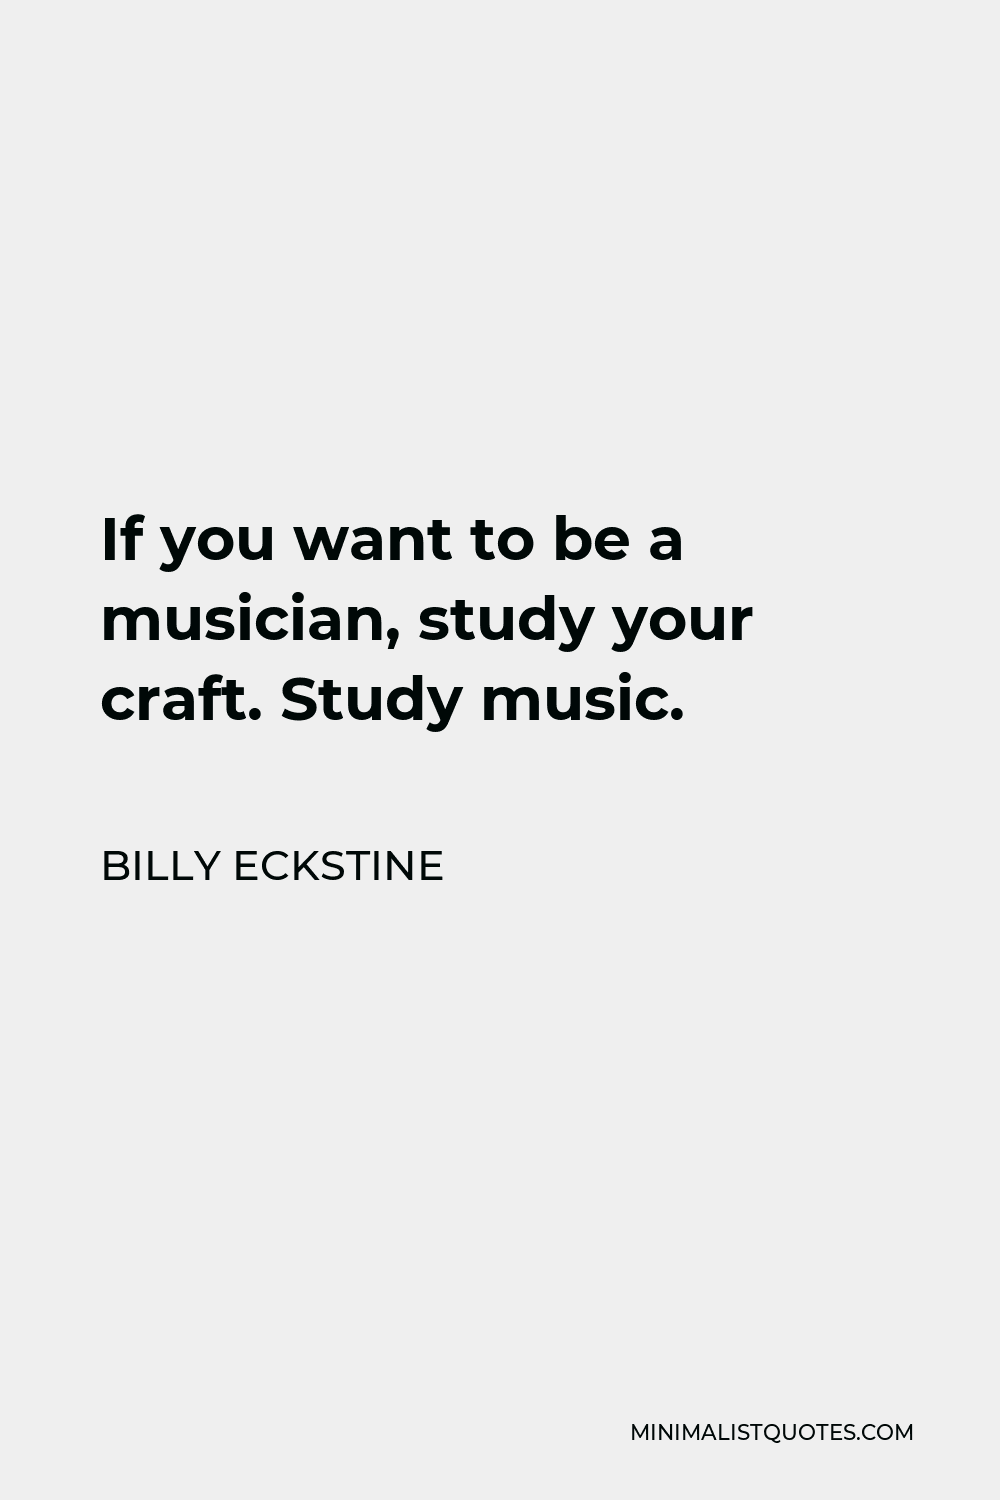 Billy Eckstine Quote - If you want to be a musician, study your craft. Study music.